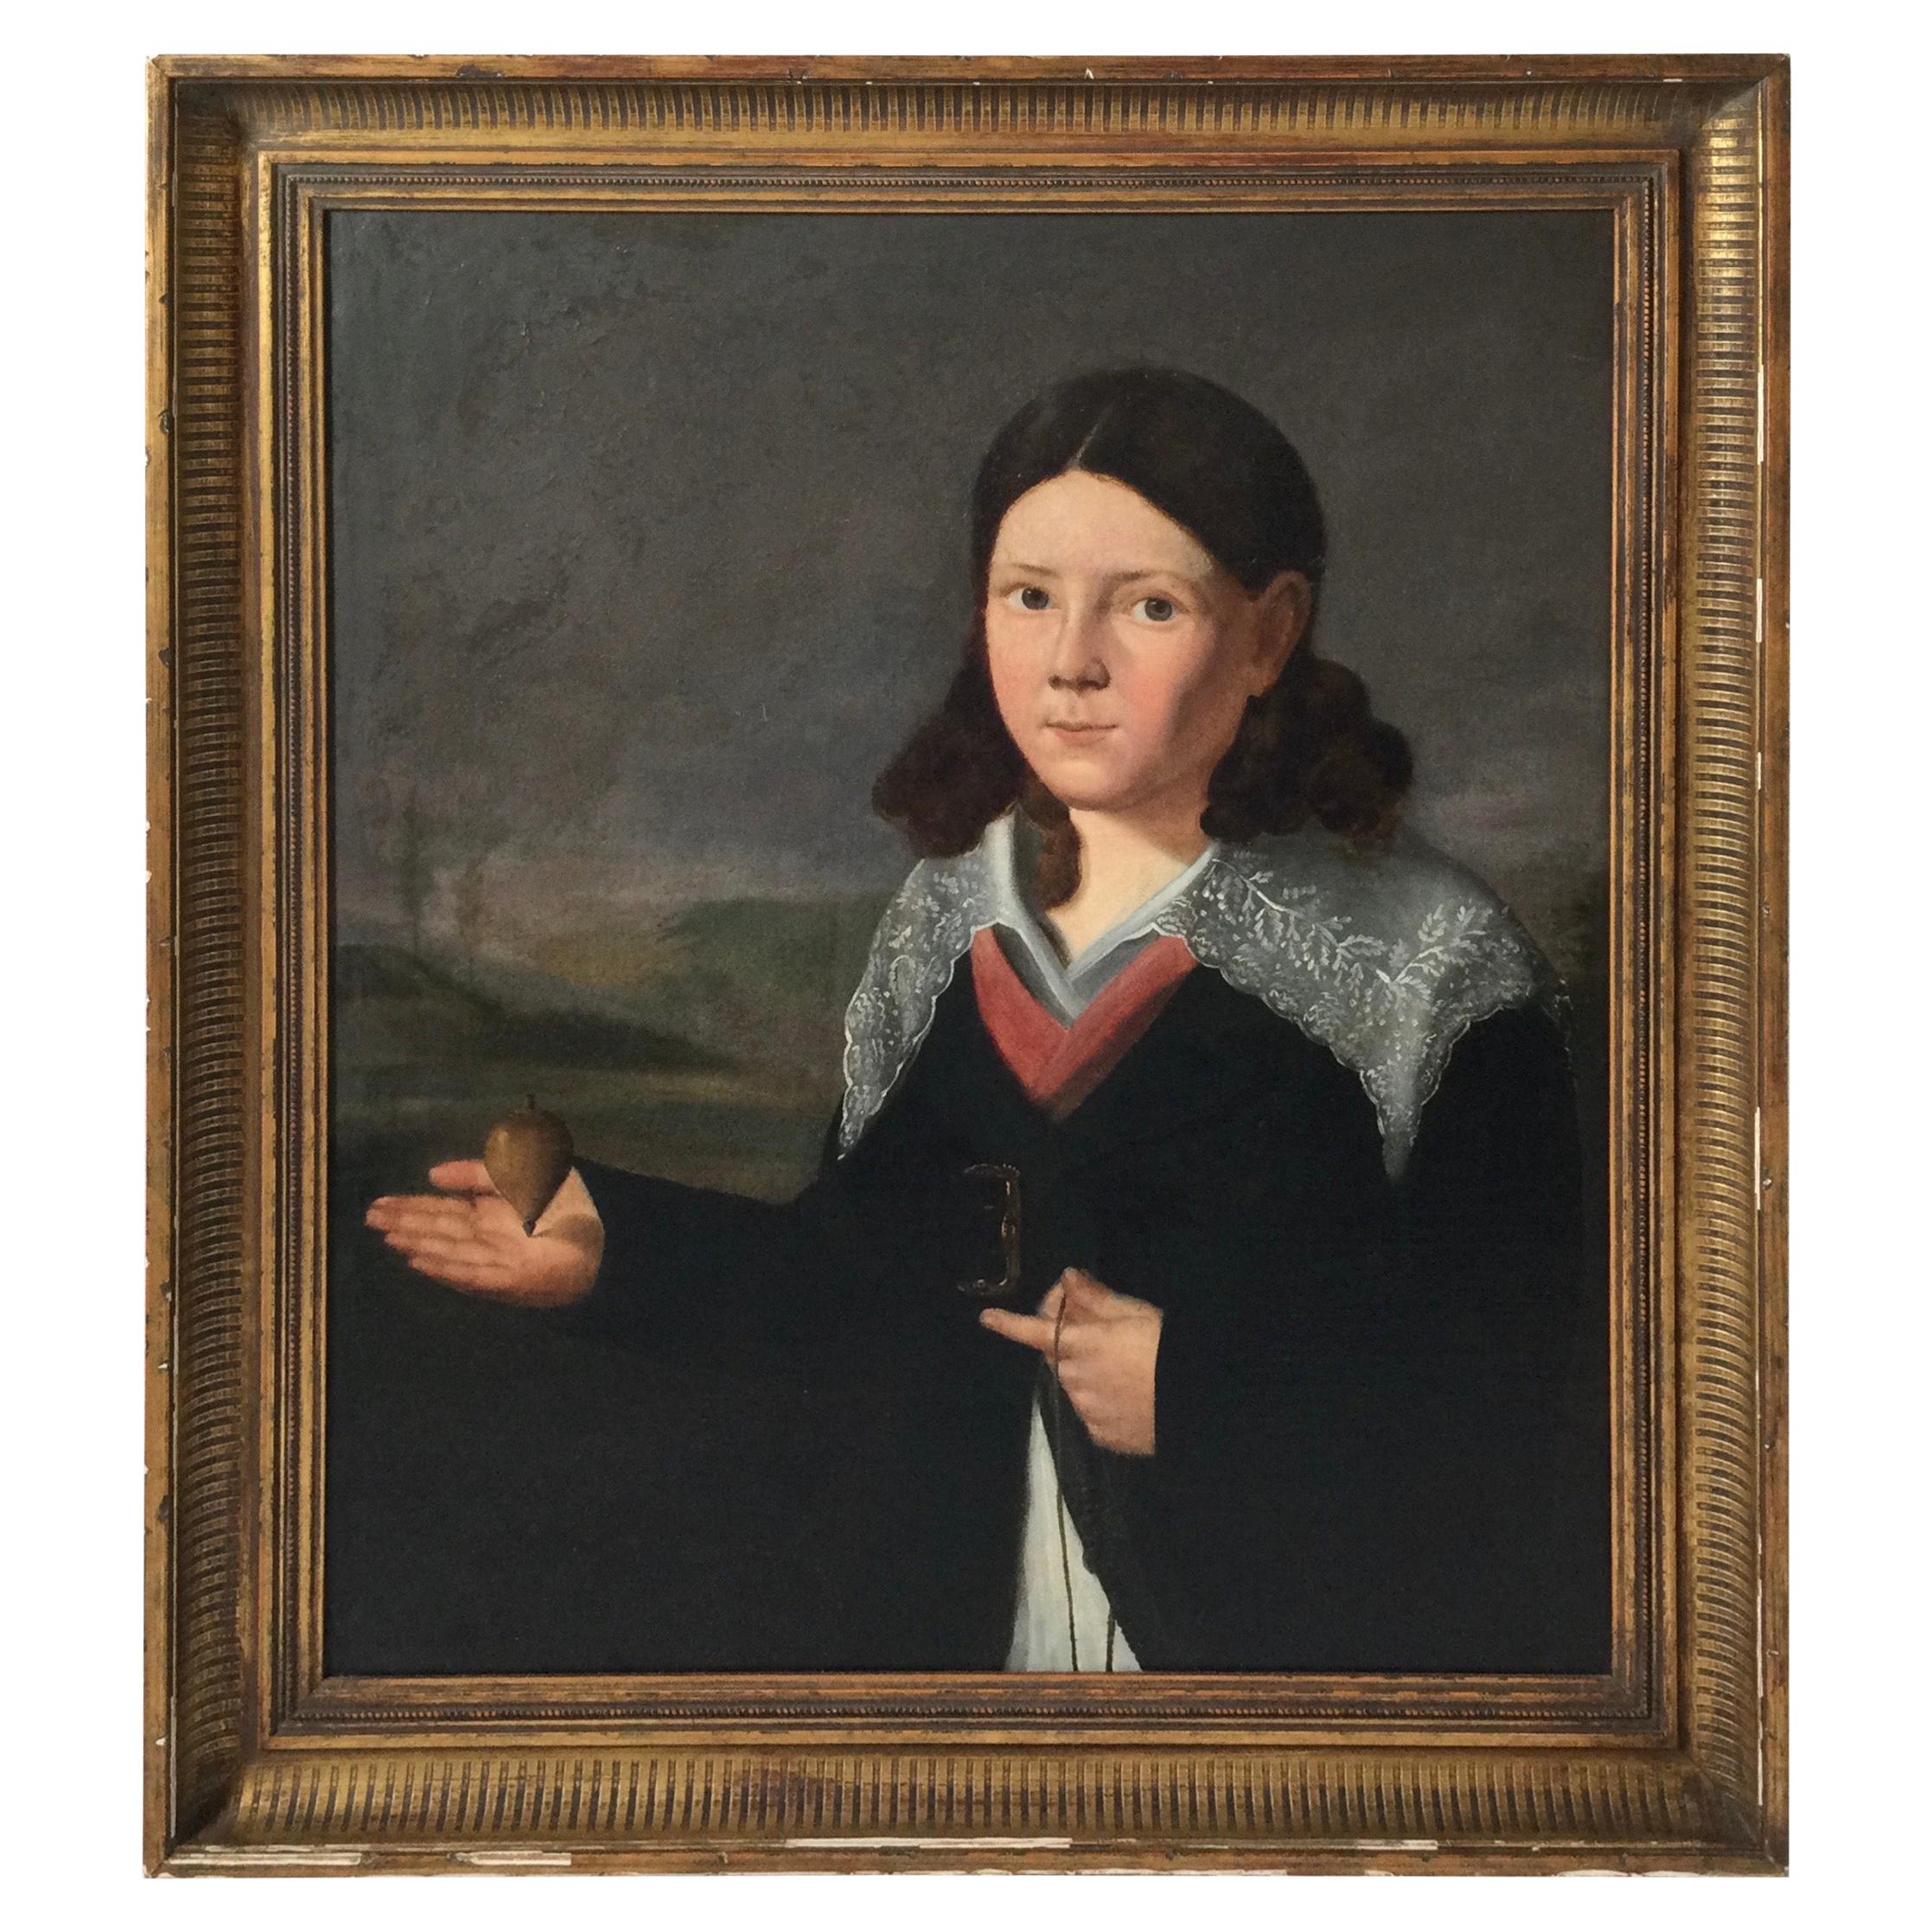 Oil on Canvas of a Young Bow with Lace Collar